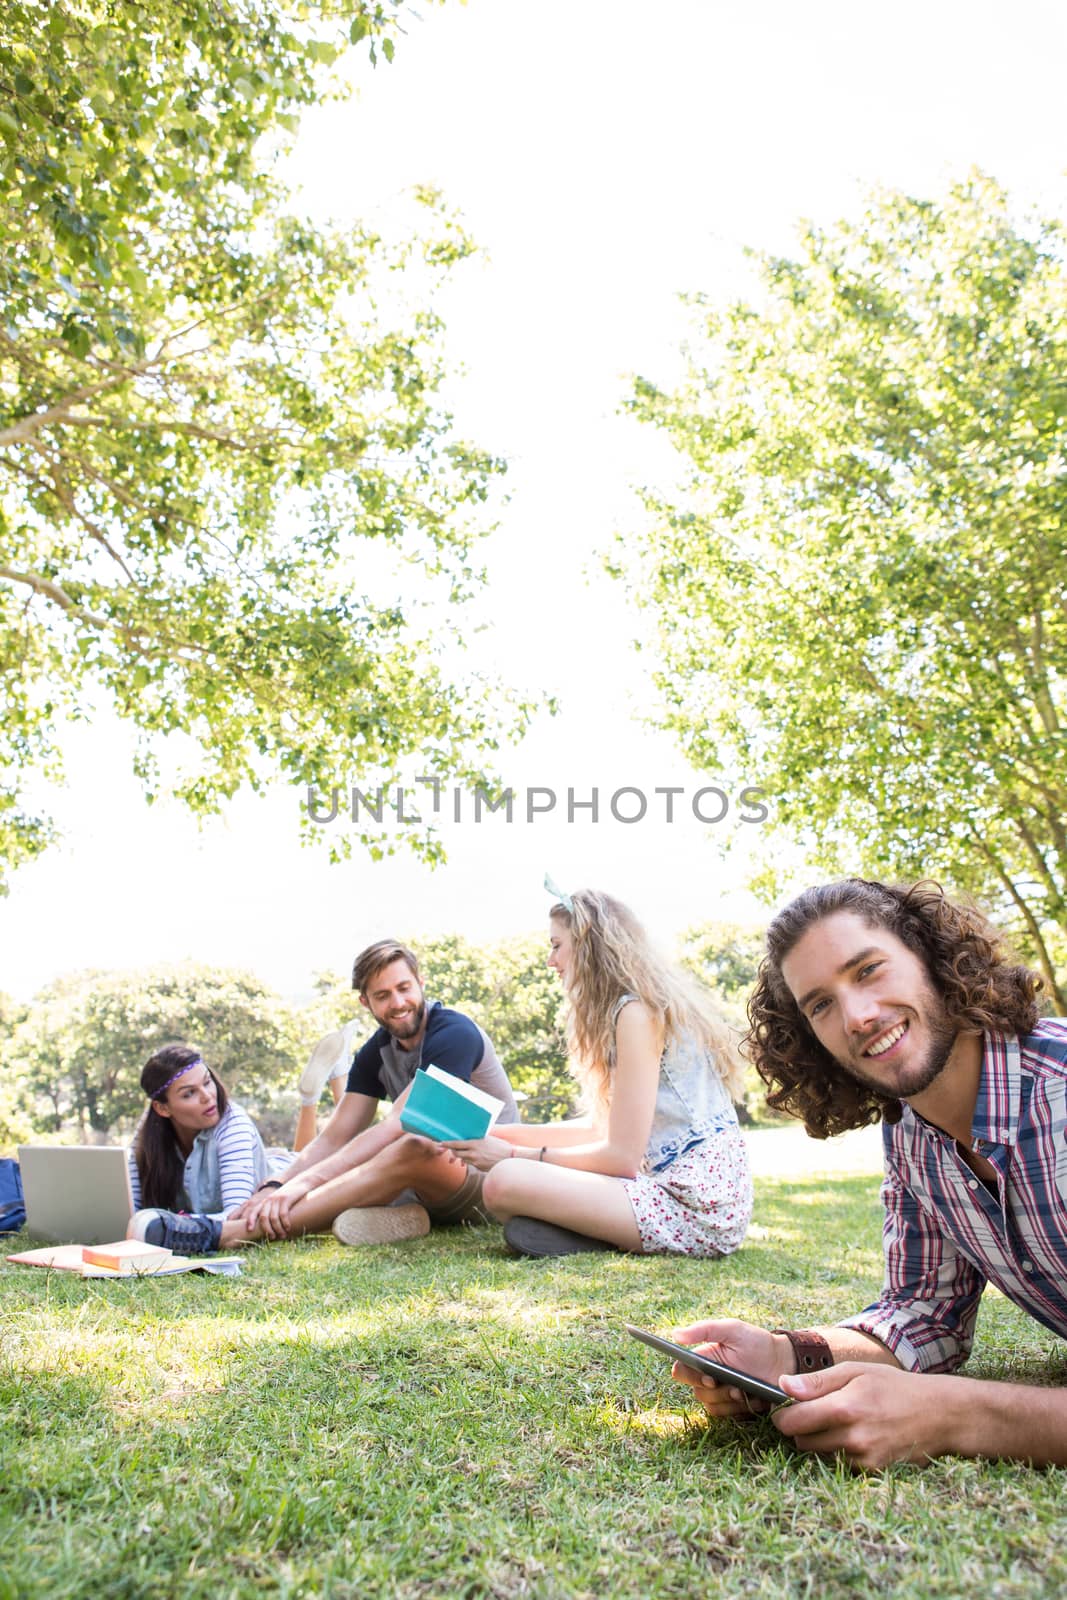 Classmates revising together on campus on a summers day